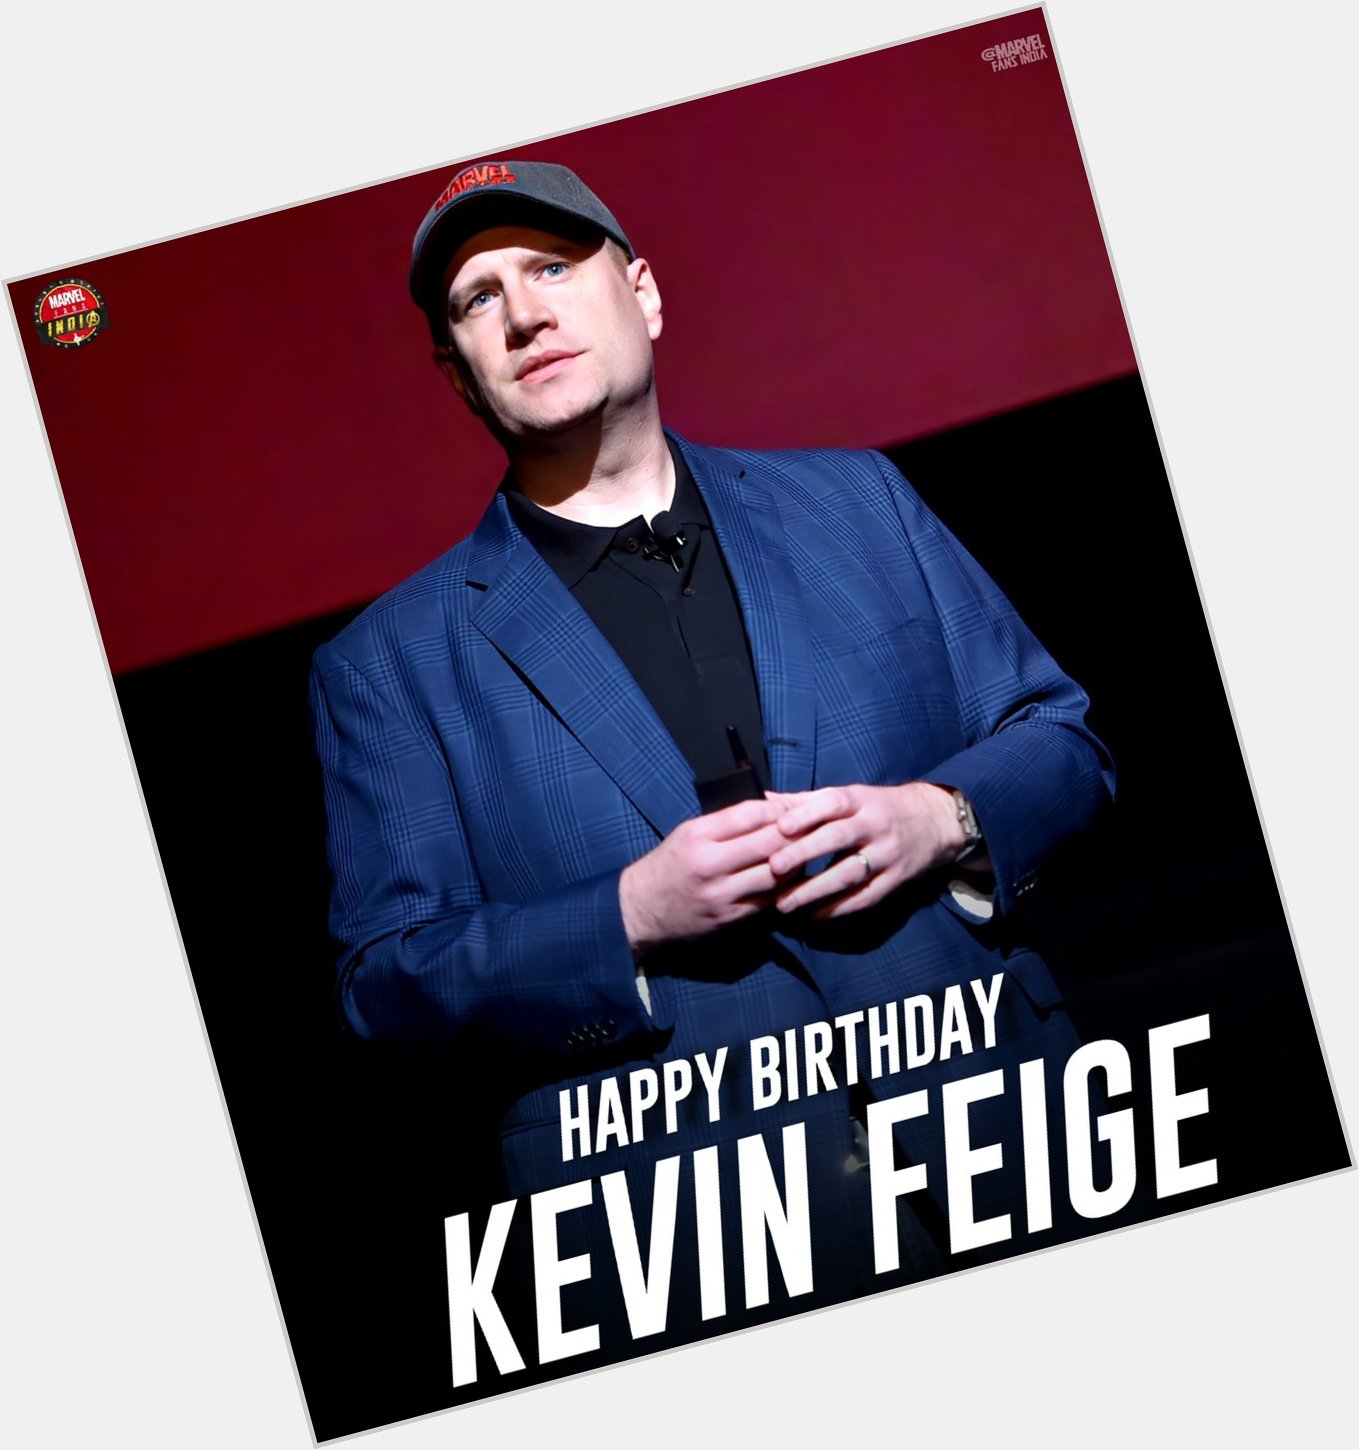  Wishing a Happy Birthday to Kevin Feige, the president of Marvel Studios   